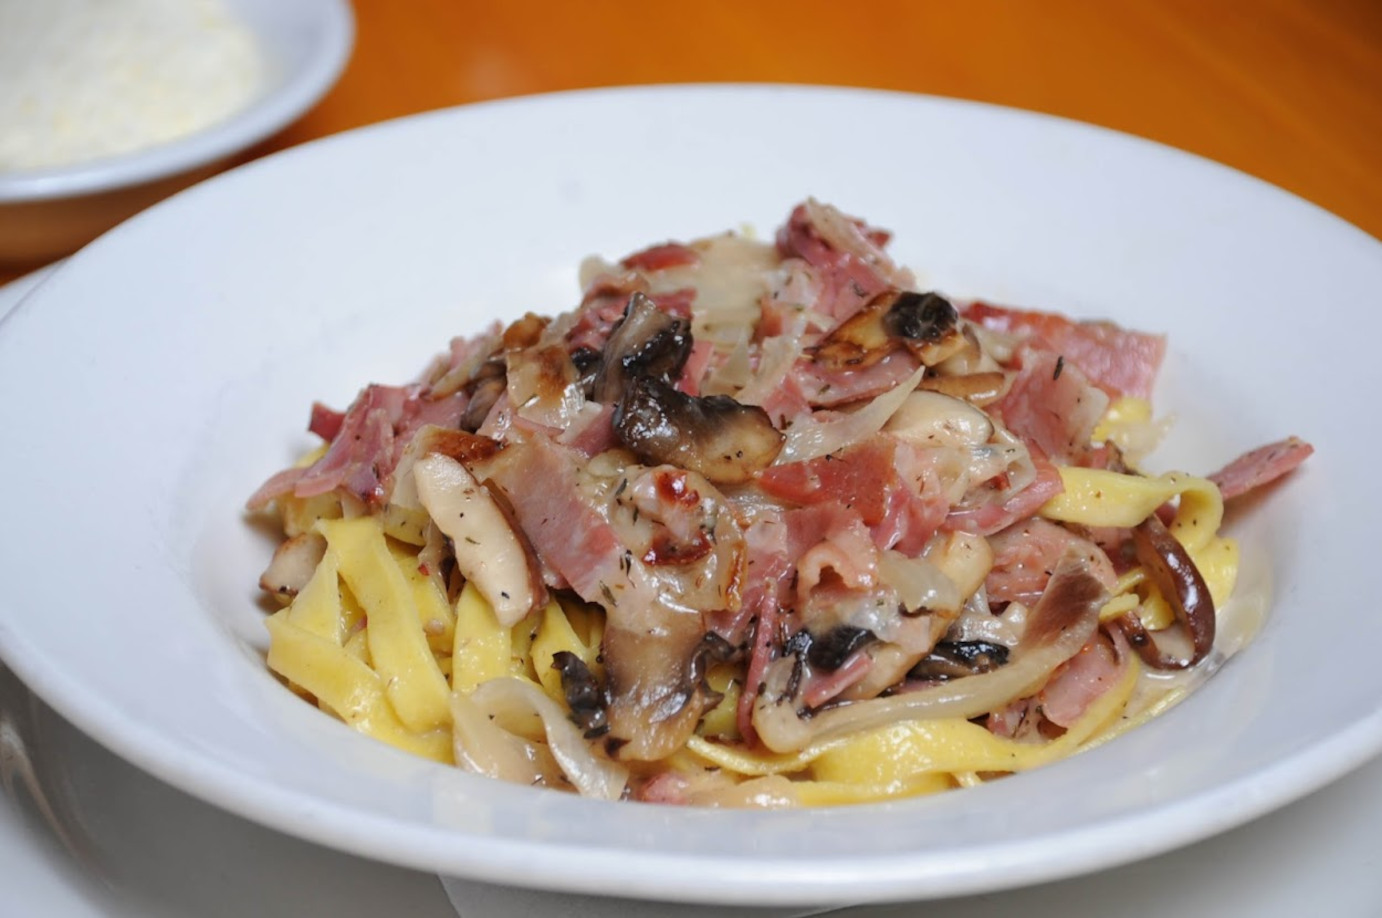 Pasta with smoked sliced meat and vegetables